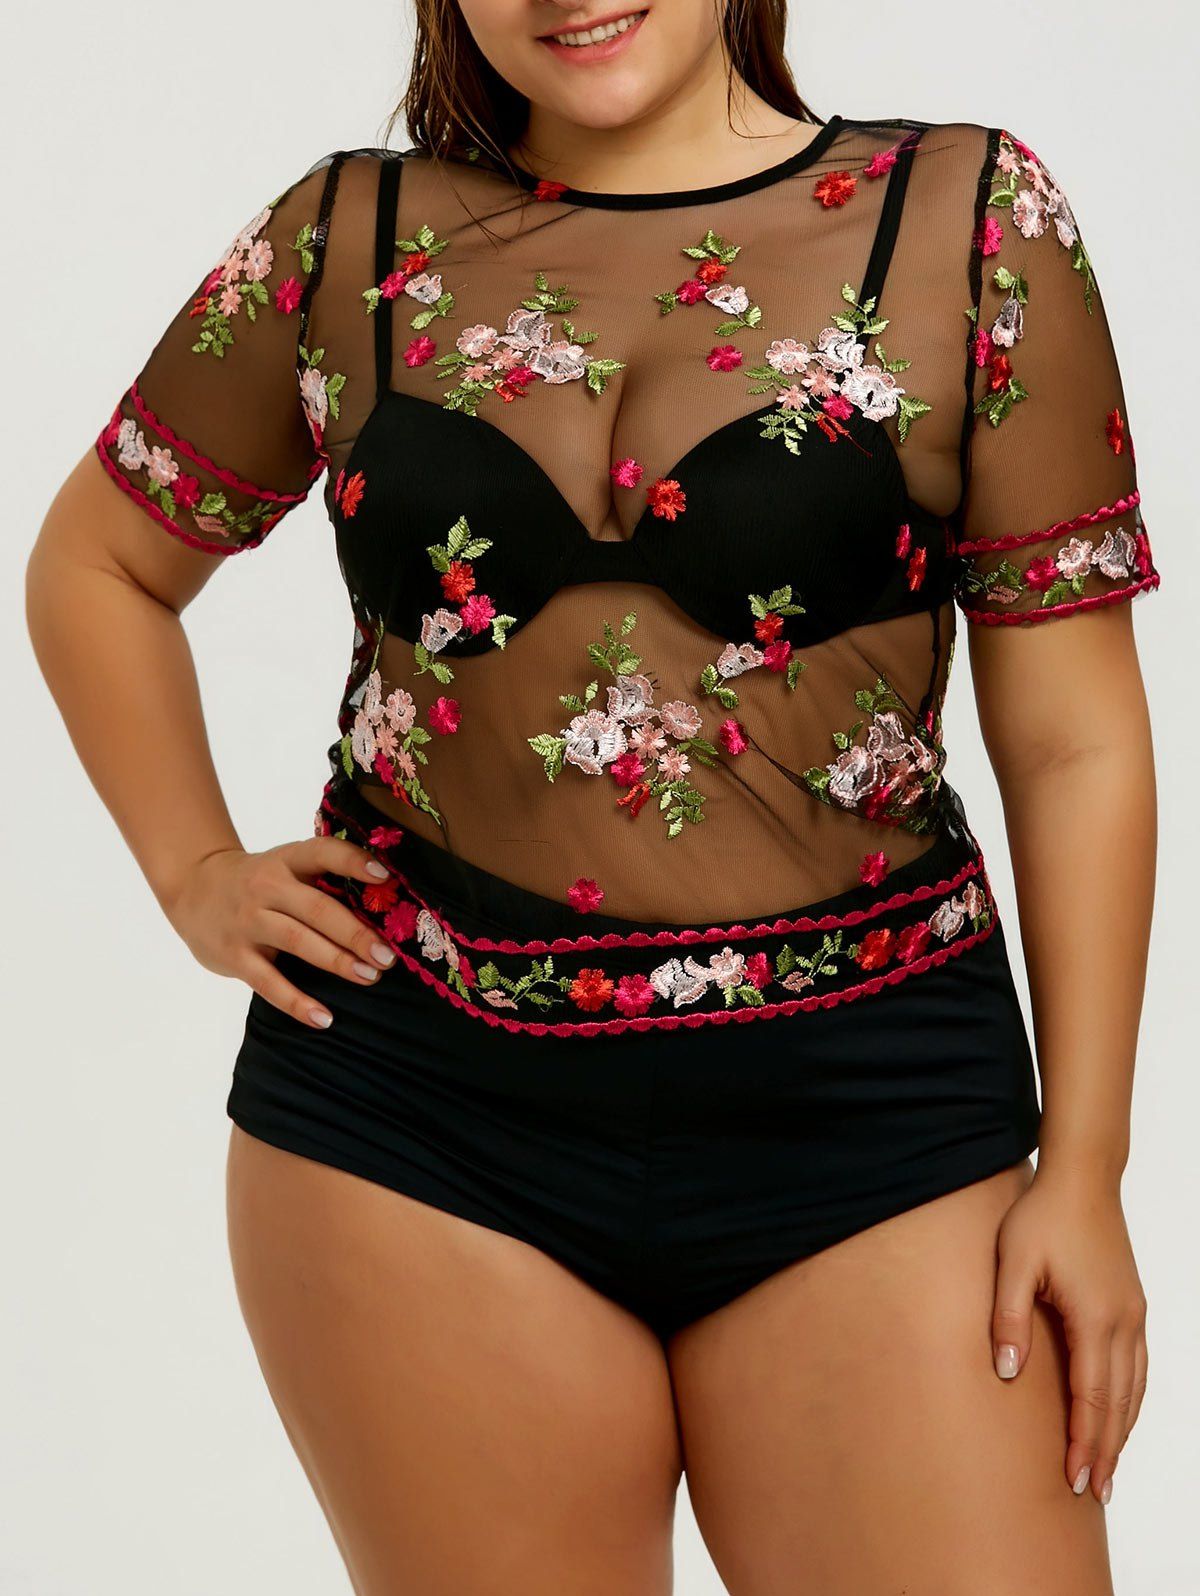 Plus Size Mesh Sheer Embroidered Cover Up - COLORMIX XL